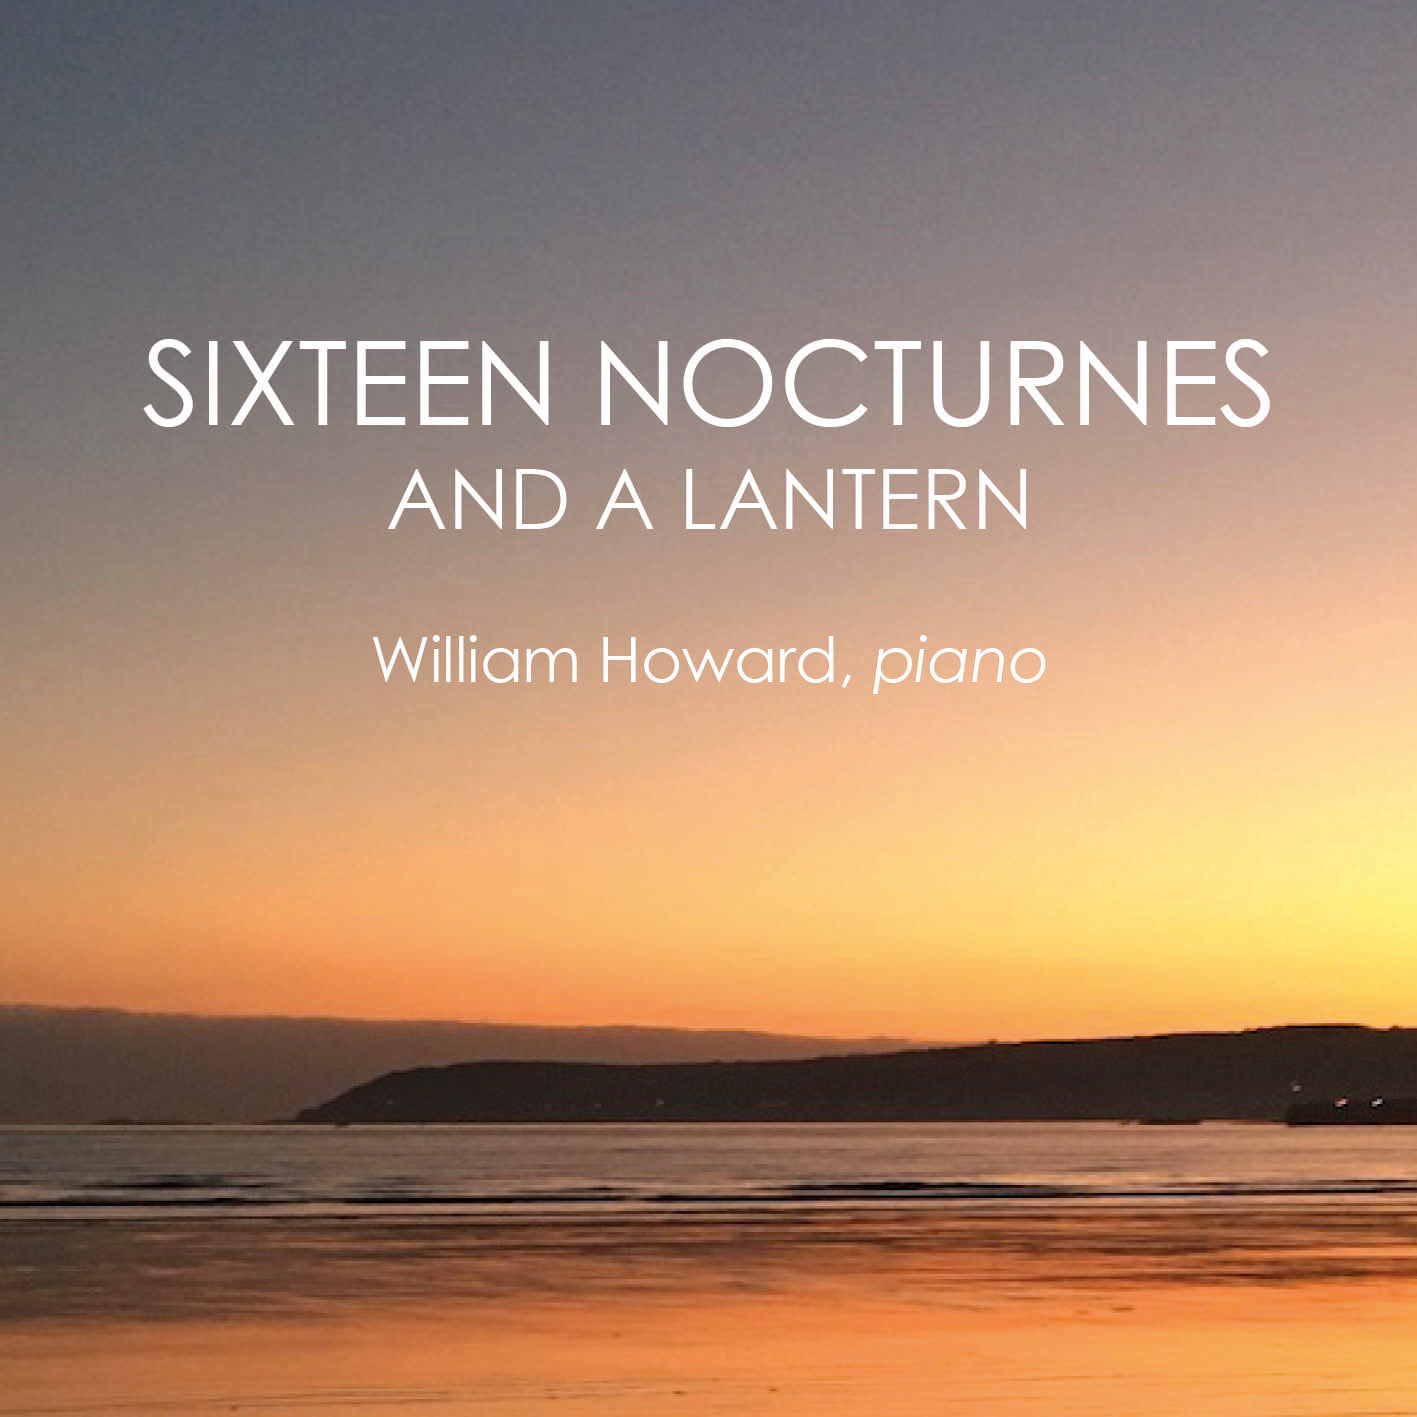 Sixteen Nocturnes and a Lantern - William Howard